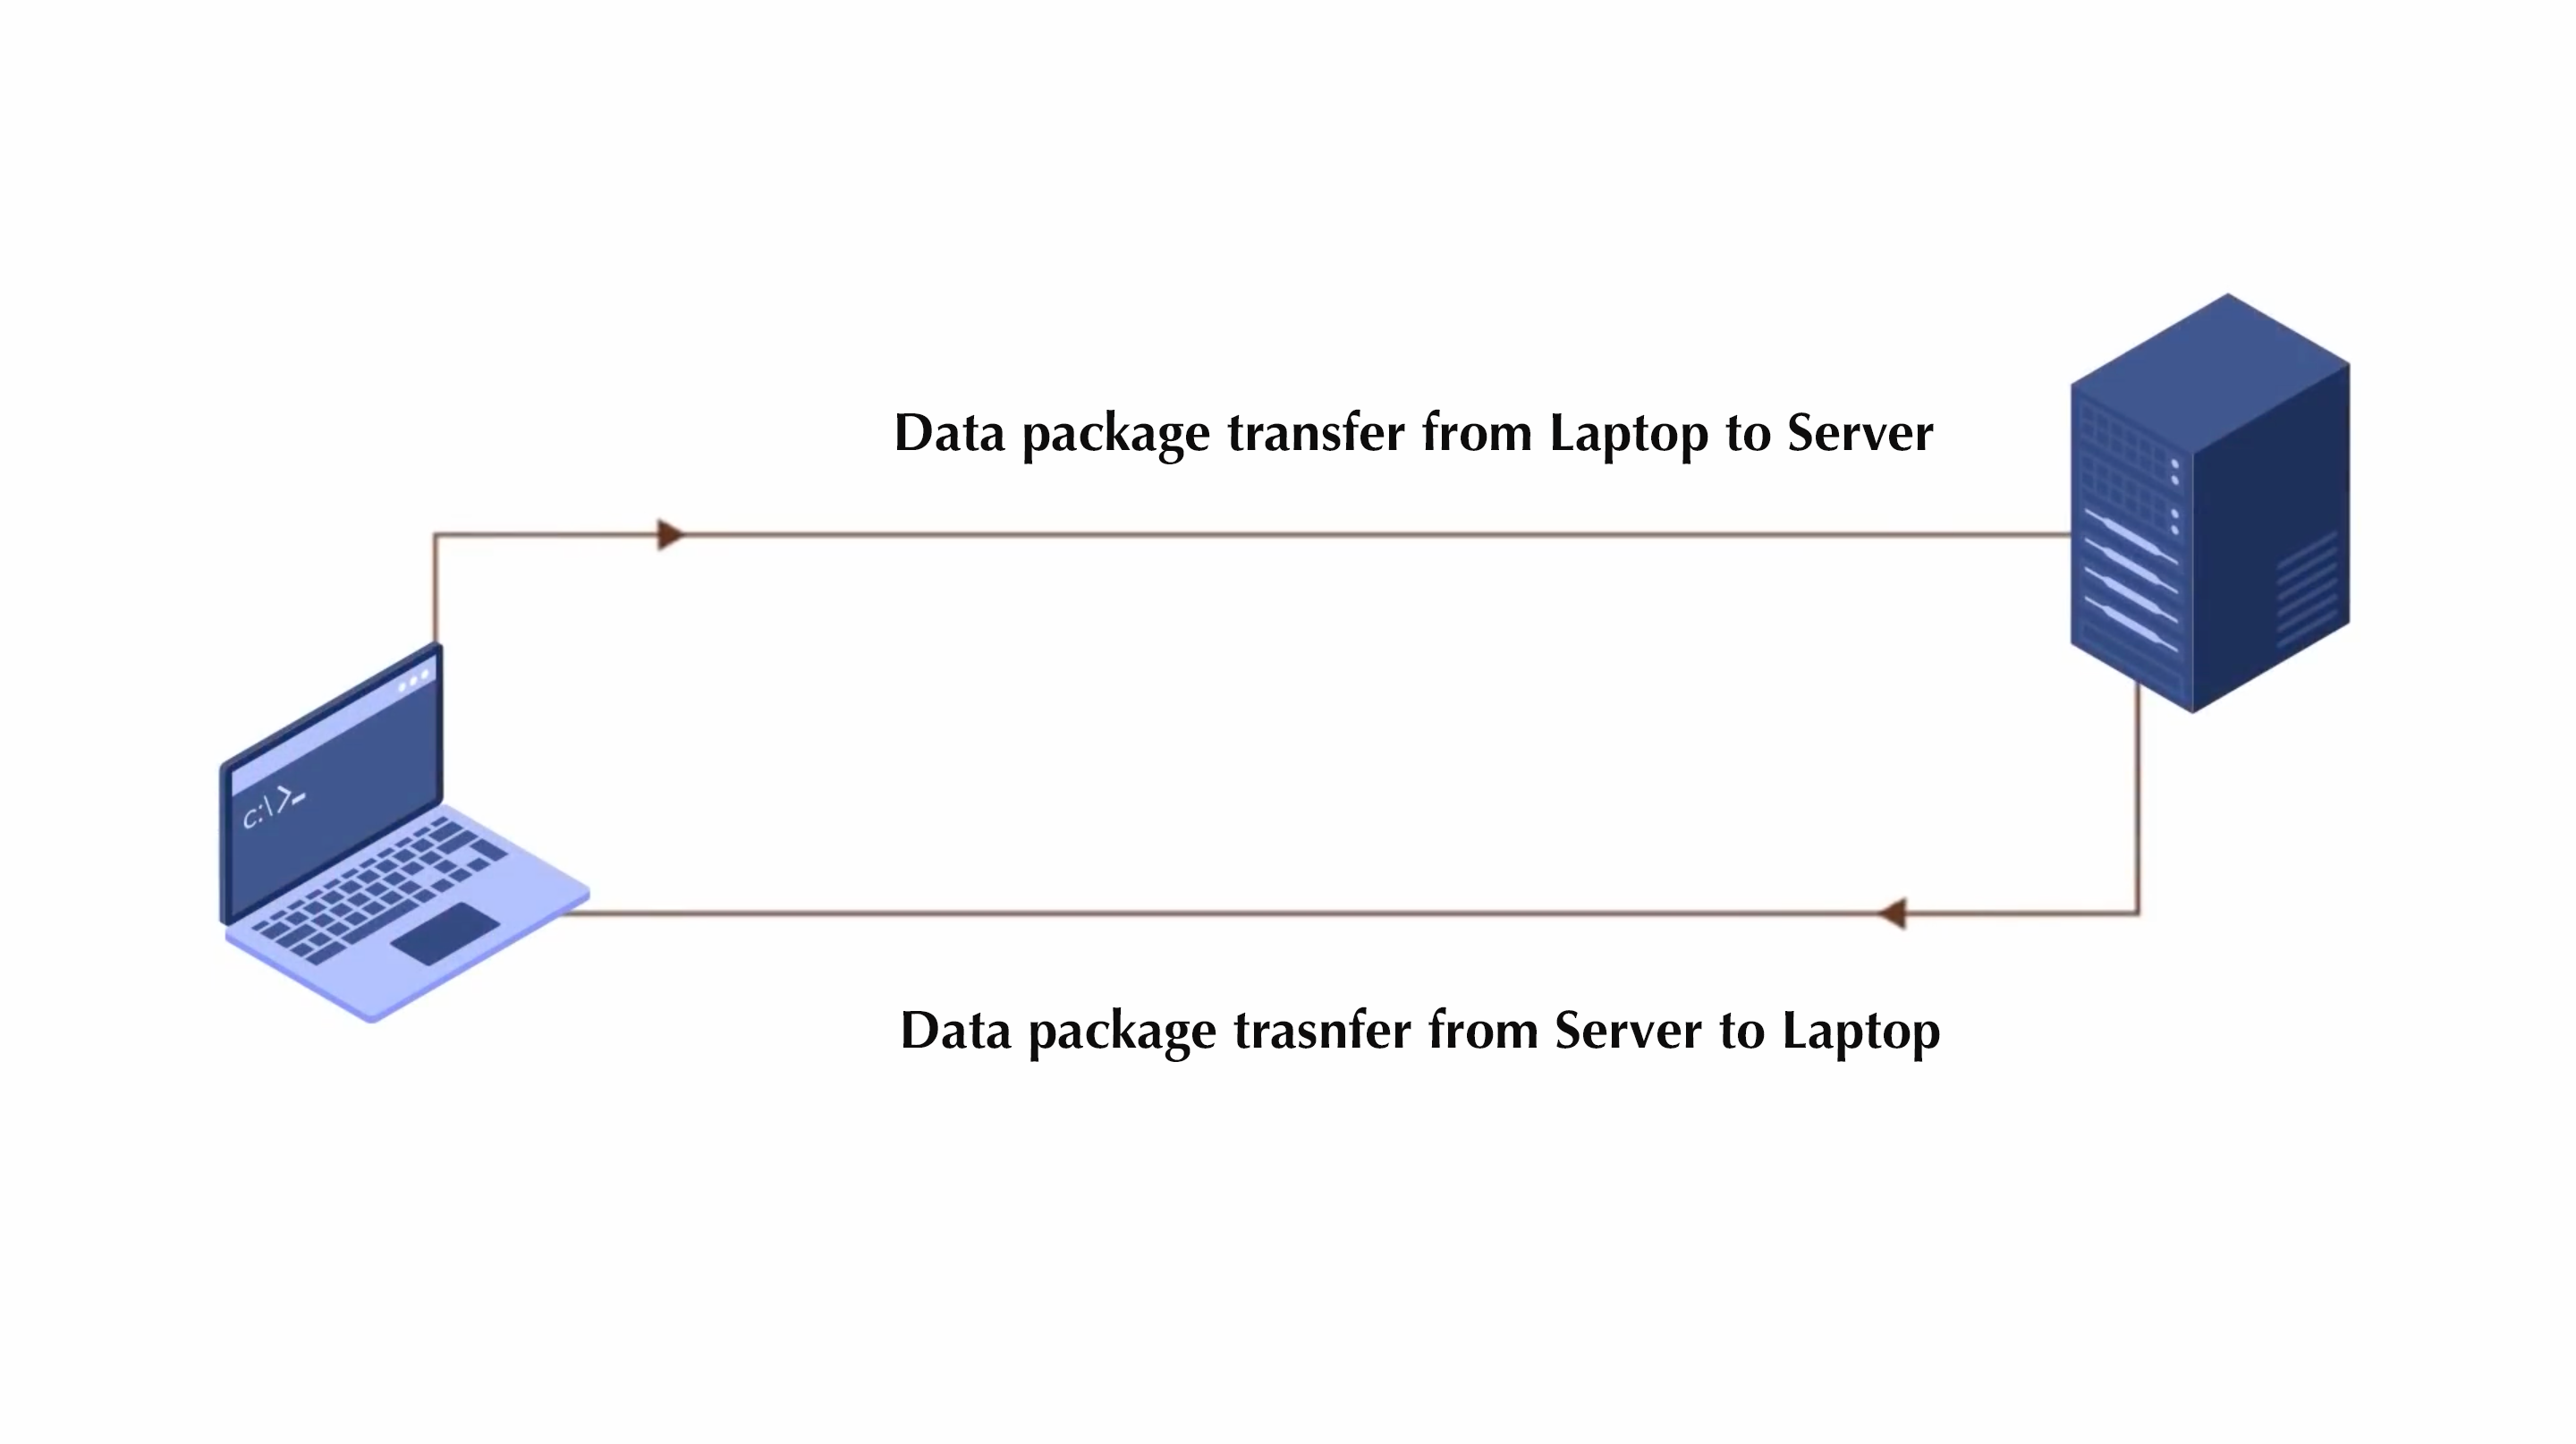 Device and server communicating in data packets